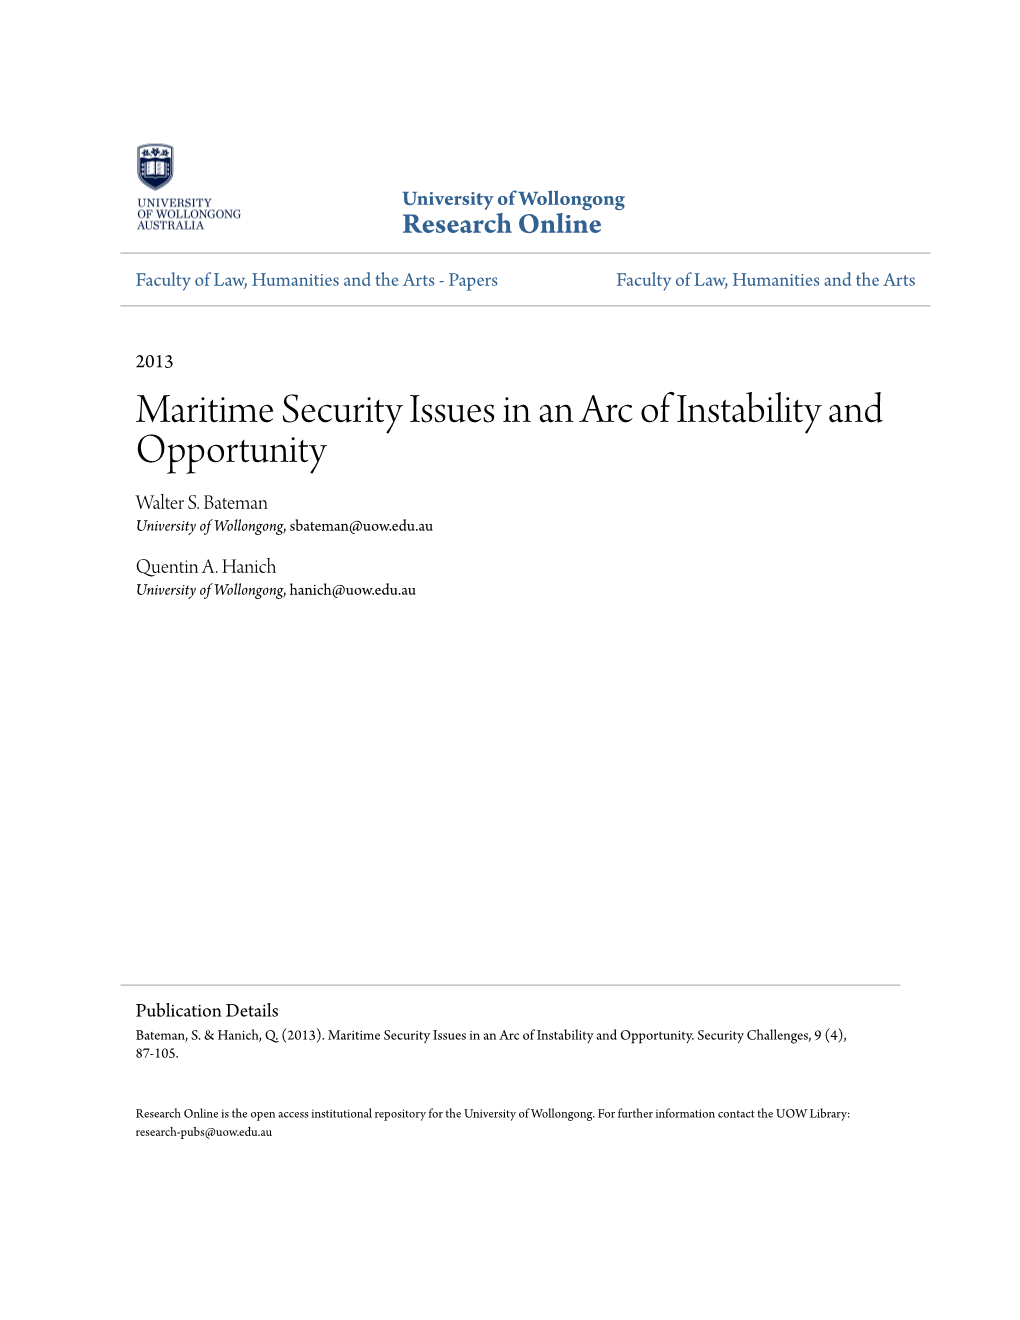 Maritime Security Issues in an Arc of Instability and Opportunity Walter S